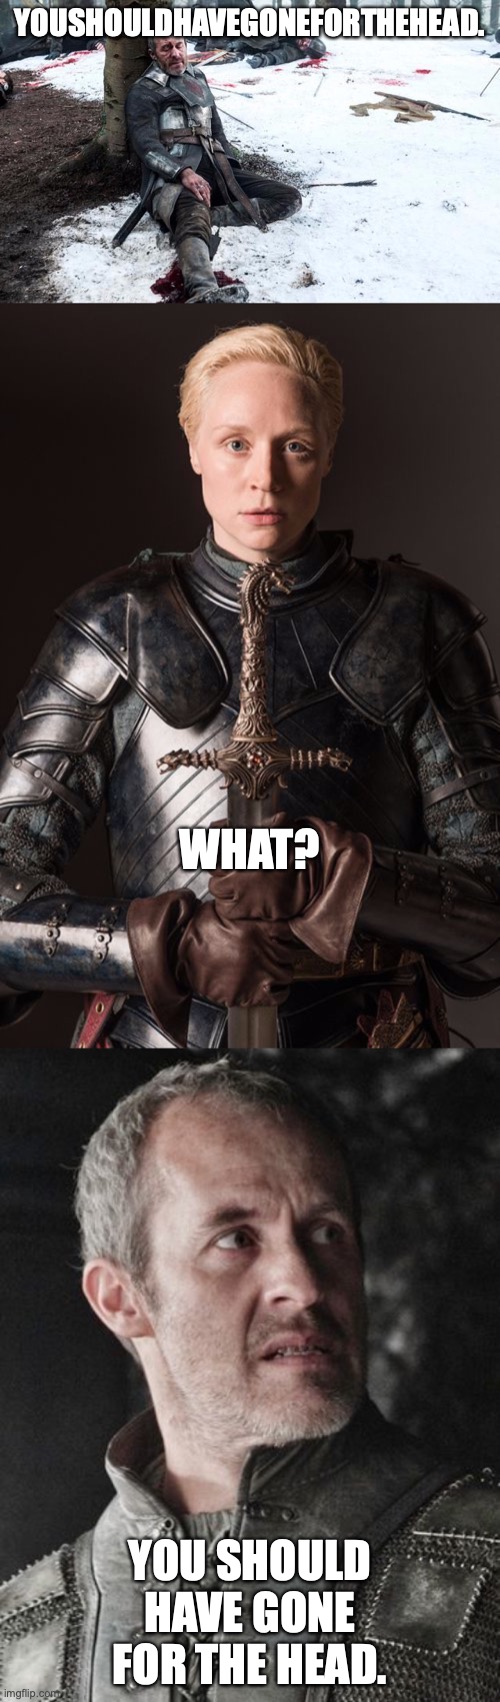 Stannis the Thannis | YOUSHOULDHAVEGONEFORTHEHEAD. WHAT? YOU SHOULD HAVE GONE FOR THE HEAD. | image tagged in stannis,brienne of tarth | made w/ Imgflip meme maker